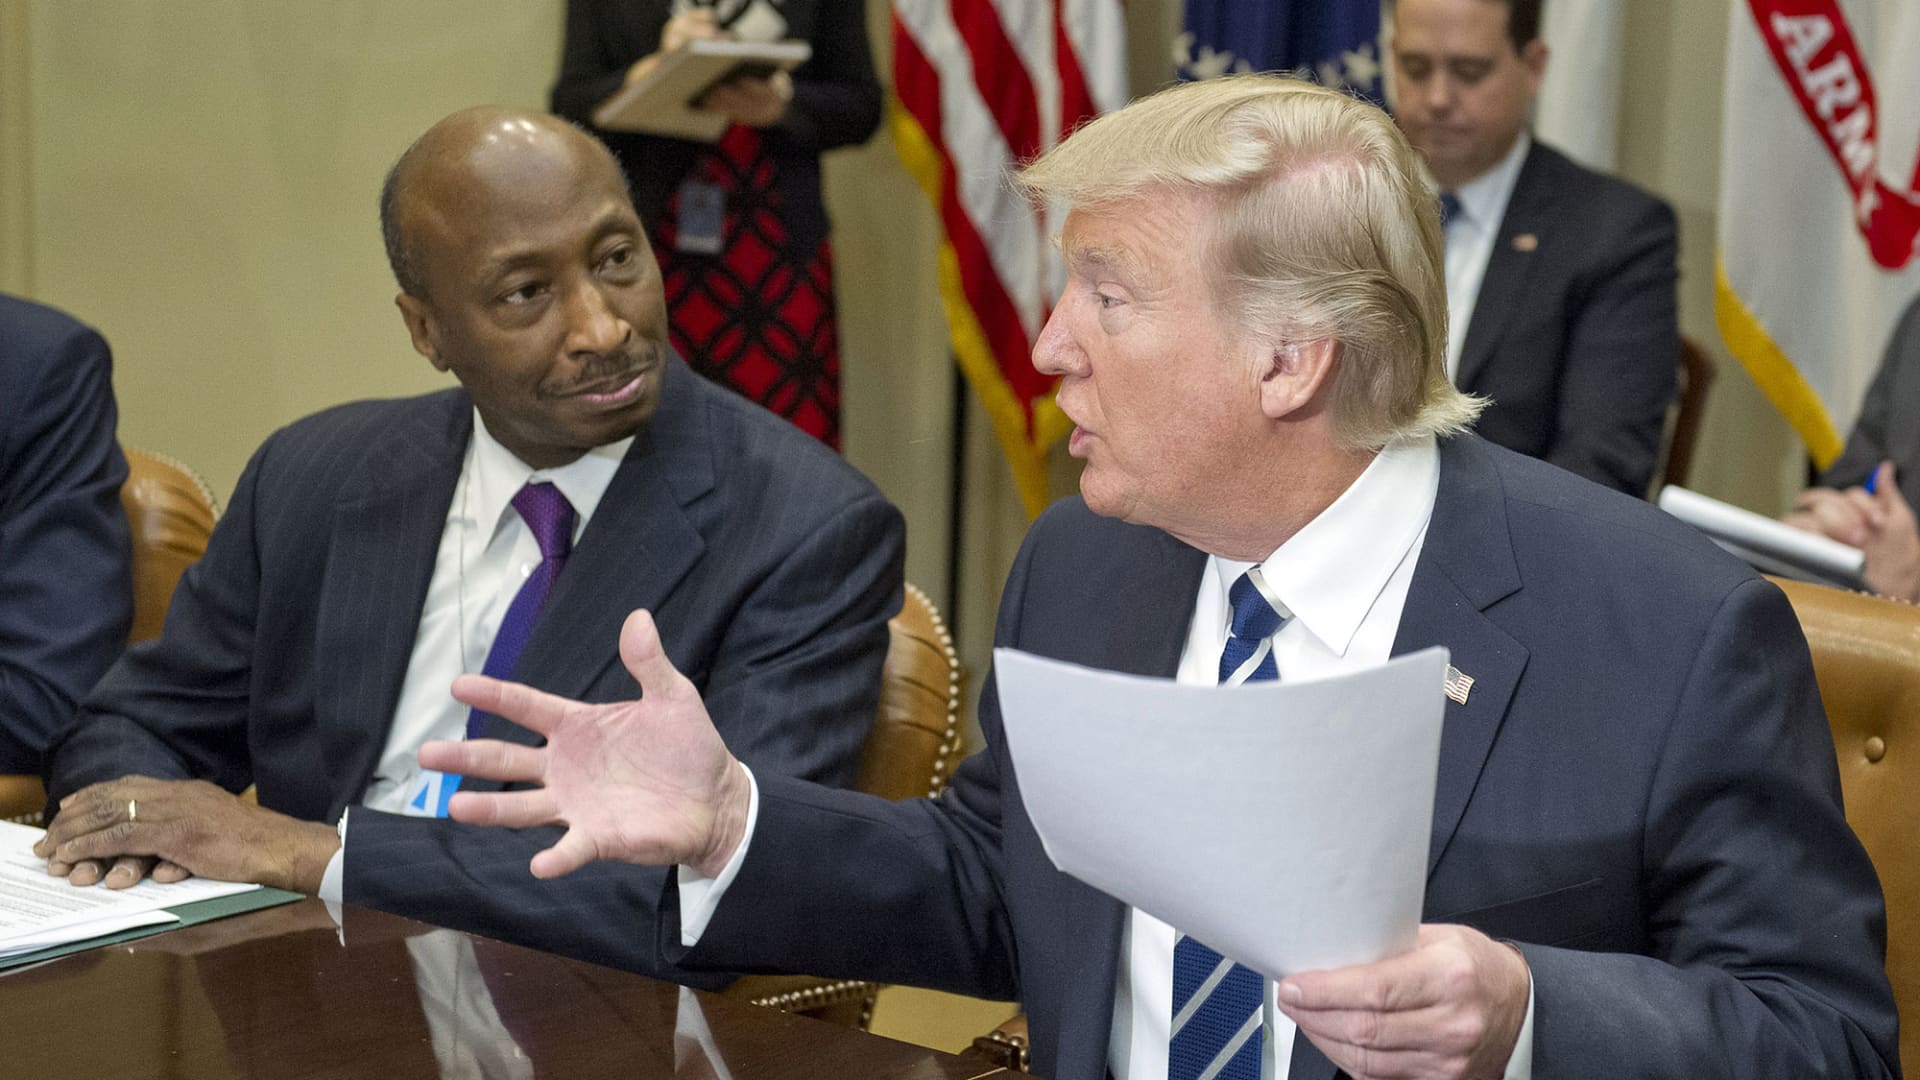 President Donald Trump, right, speaks as Ken Frazier, chairman and chief executive officer of Merck & Co., listens during a meeting with representatives from the Pharmaceutical Research and Manufacturers of America (PhRMA) at the White House in Washington, D.C., U.S., on Tuesday, Jan. 31, 2017.